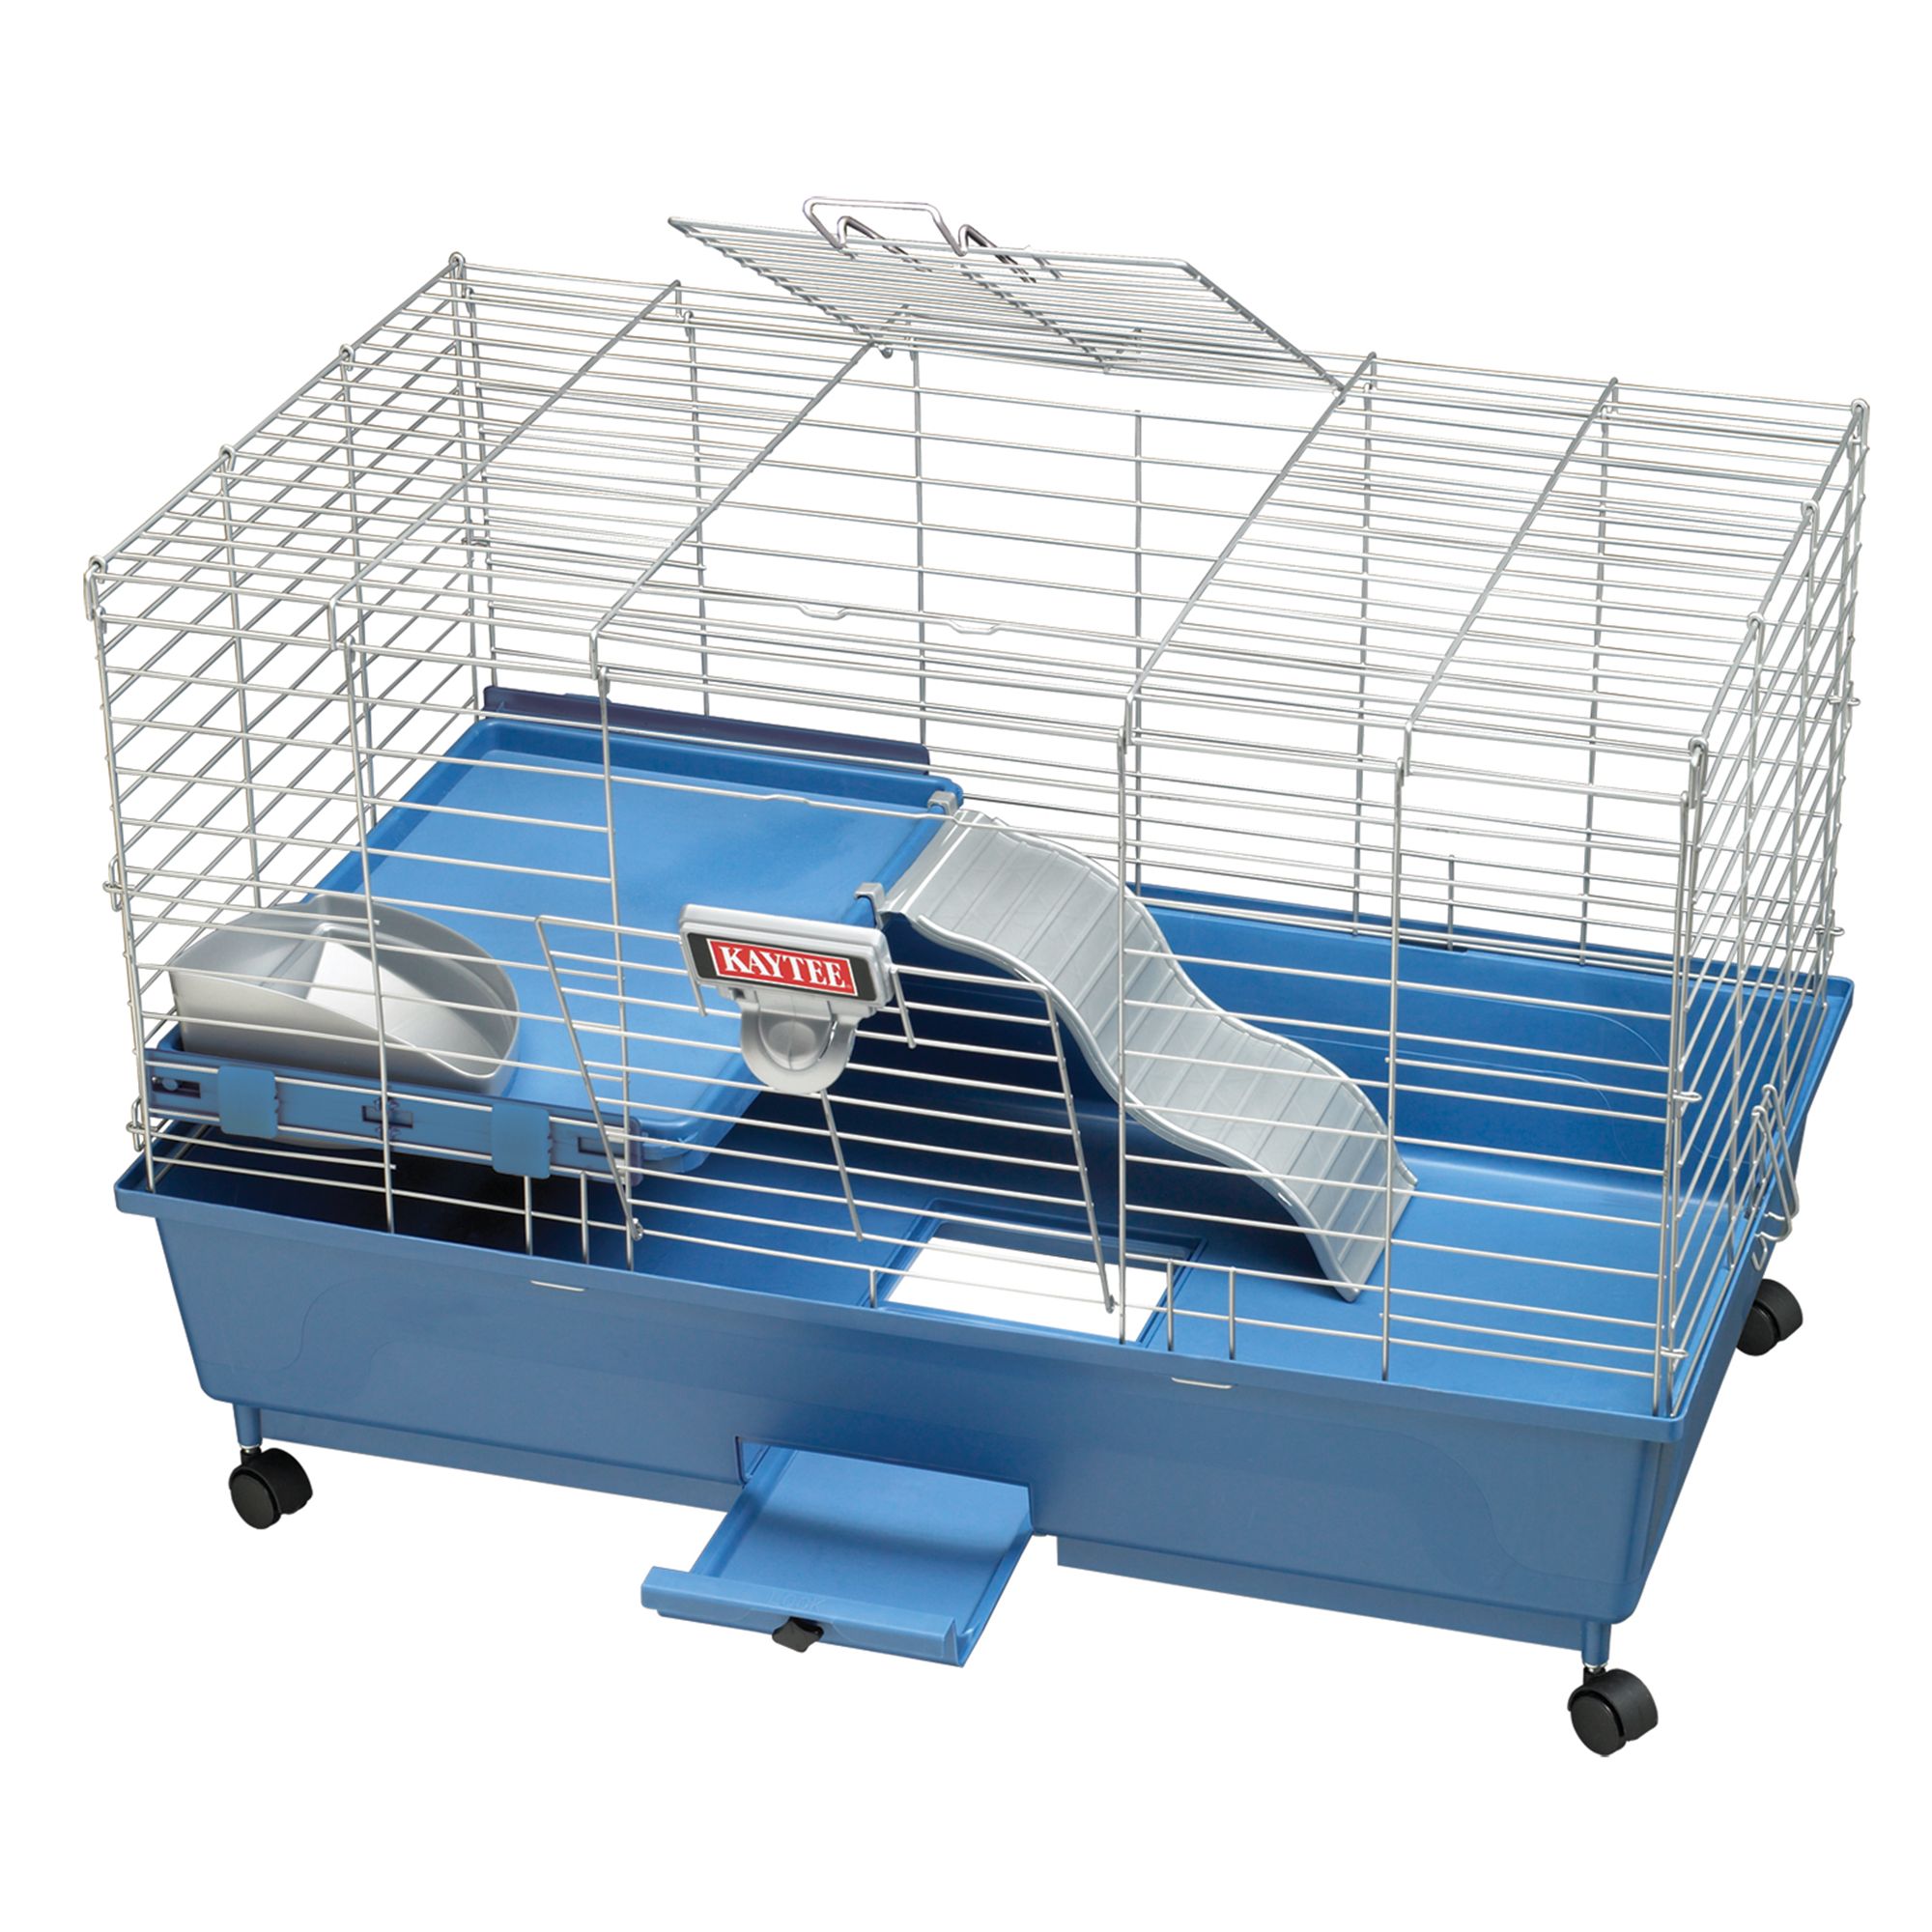 guinea pig cages from petsmart